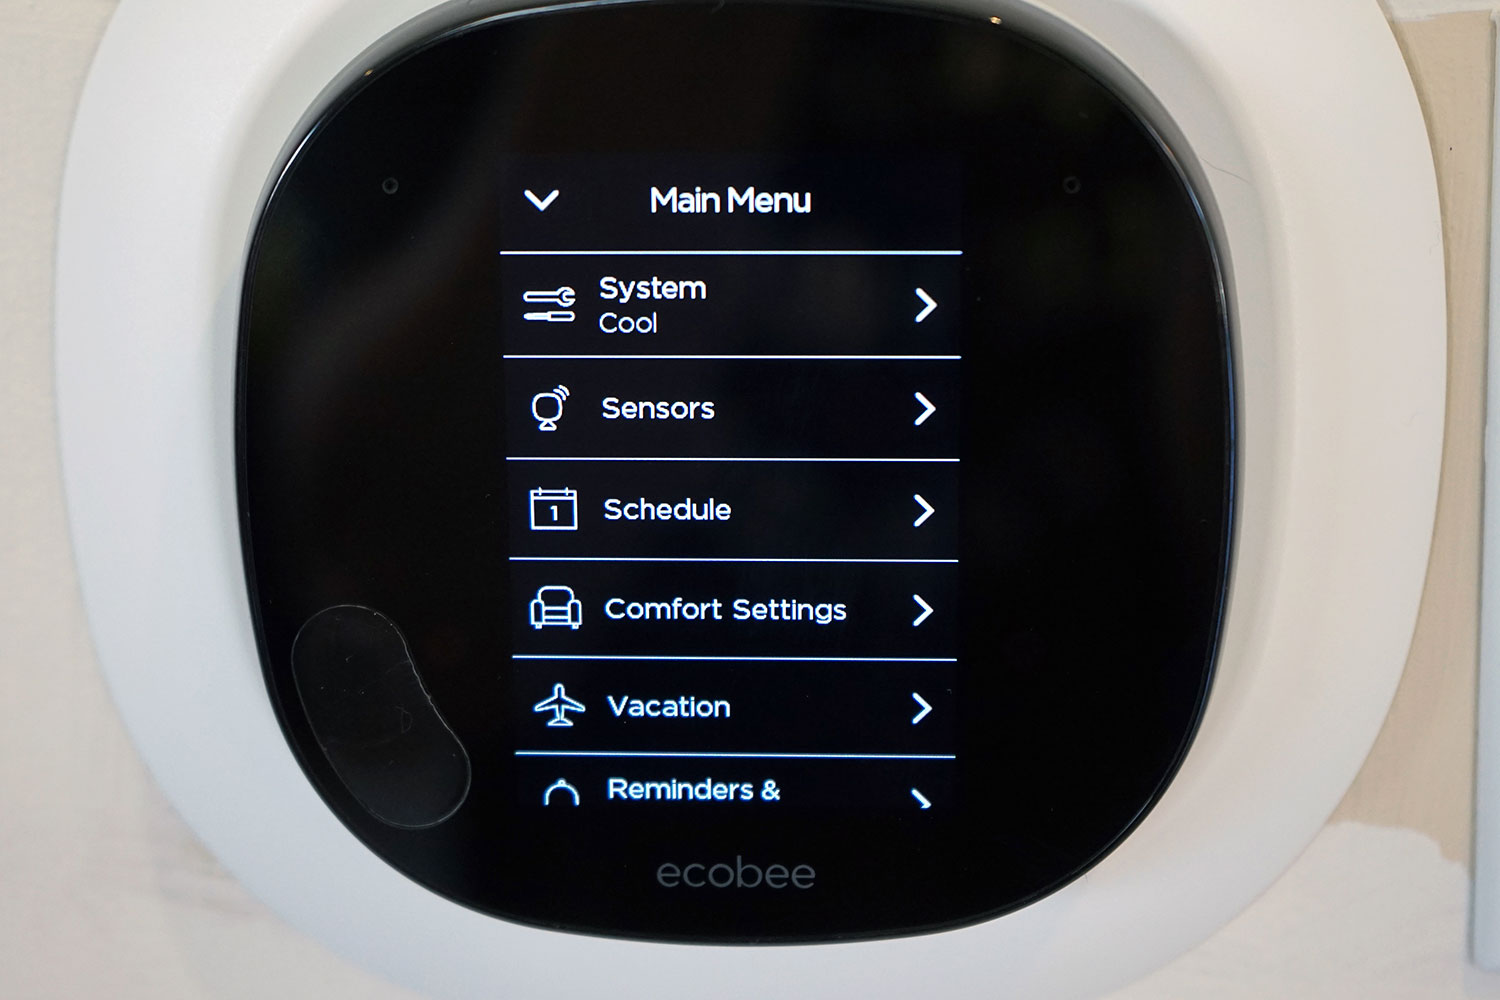 Prime Day 2021: Save on the Ecobee smart thermostat for this event